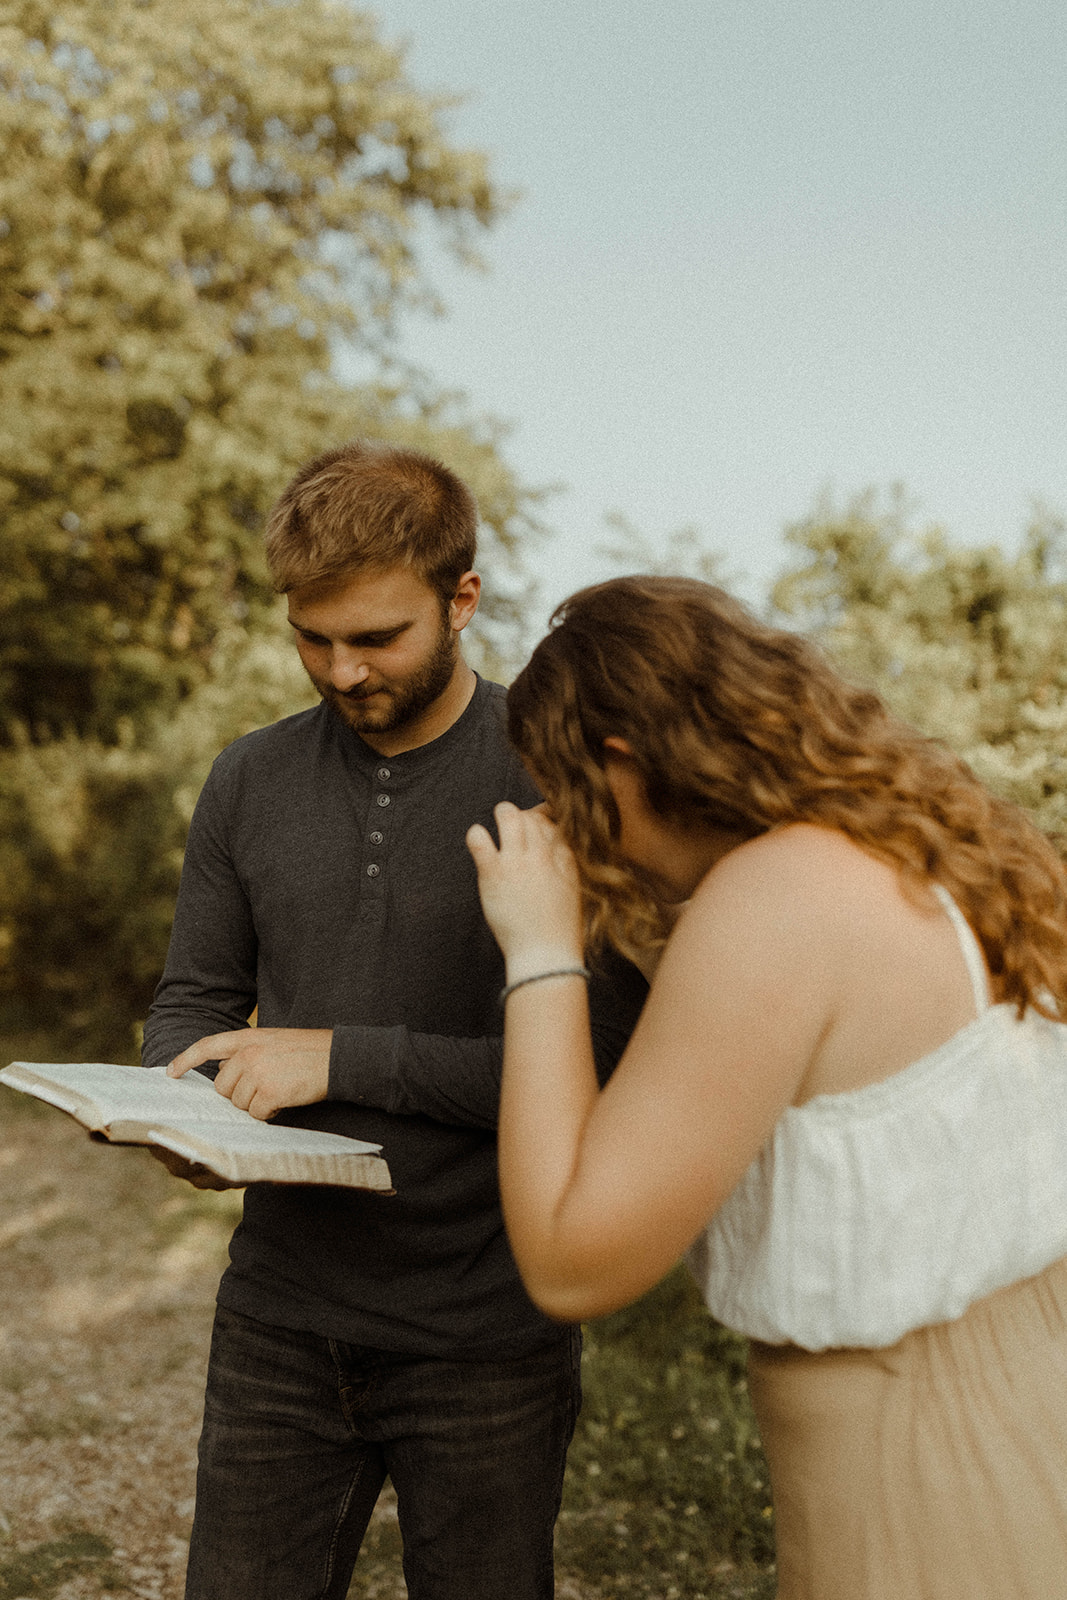 Sweet couple reading the bible together during their Upstate New York couples photoshoot.